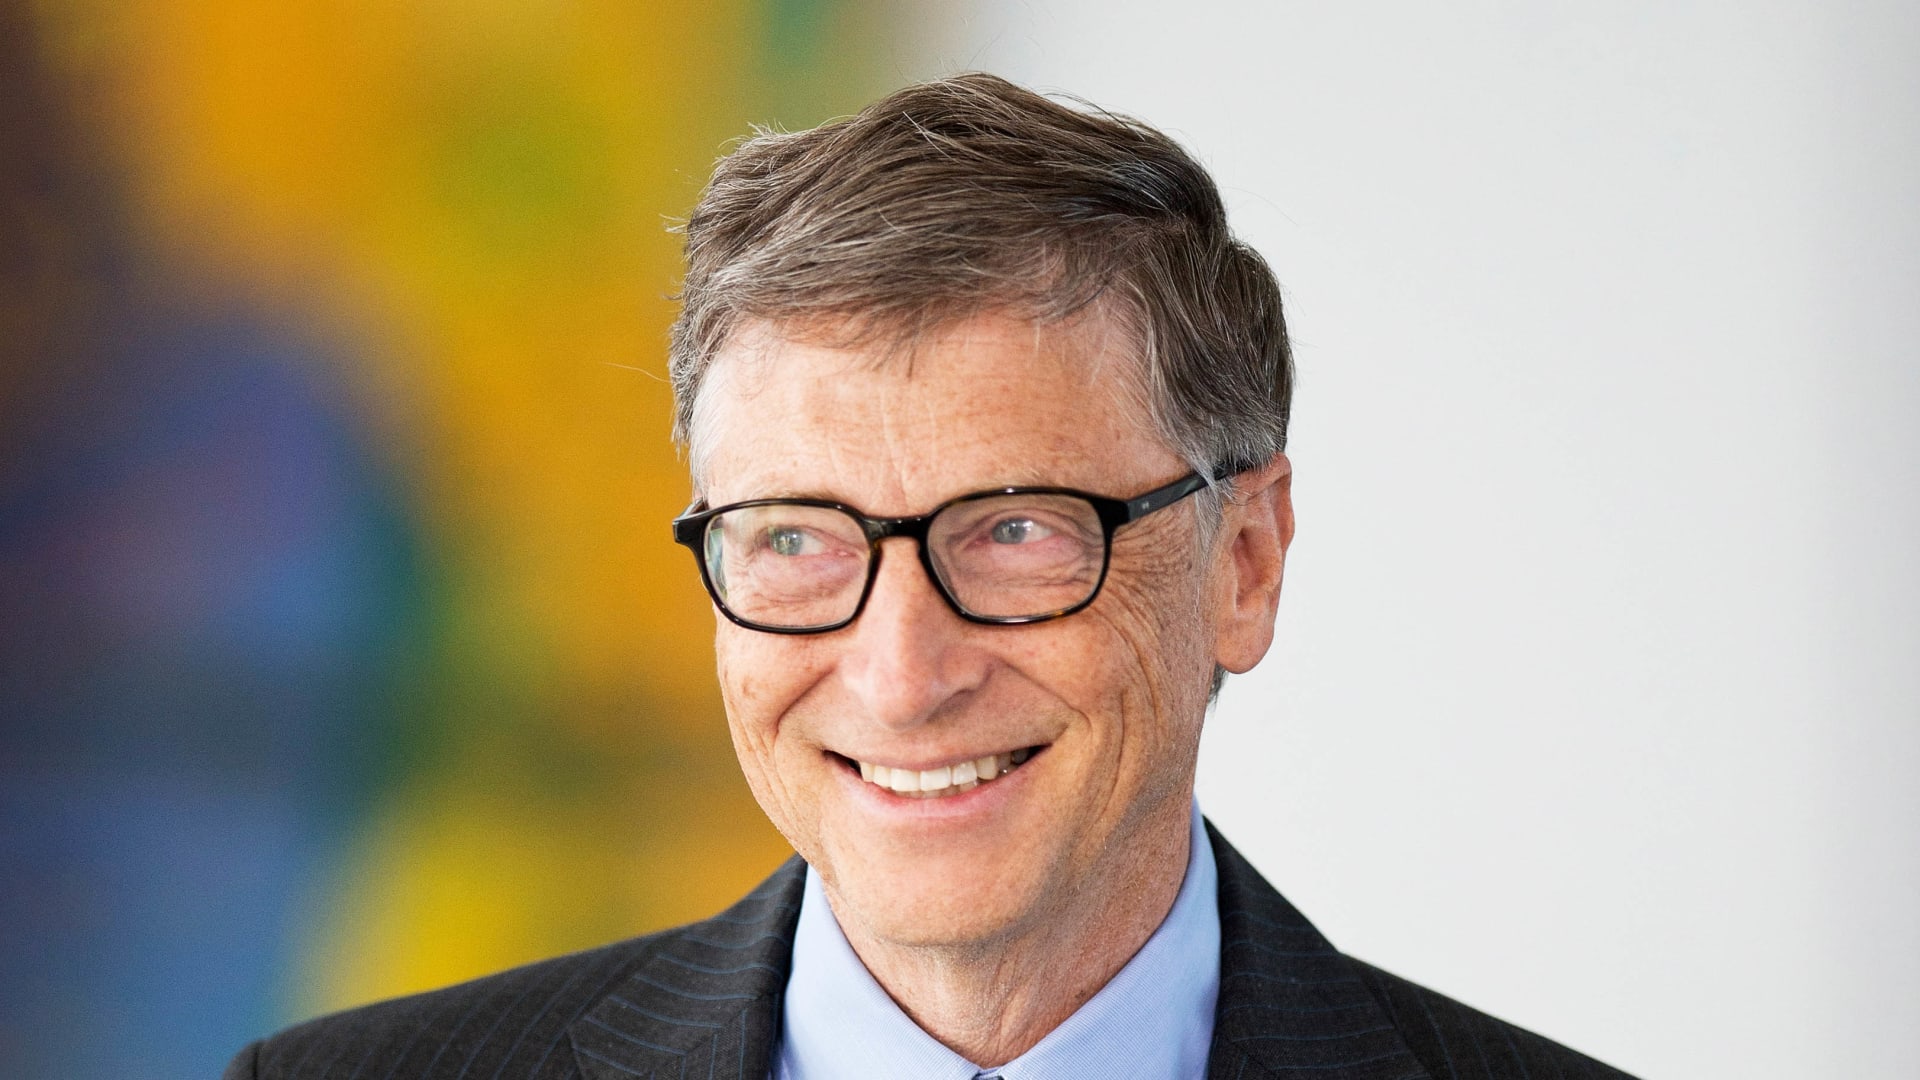 Bill Gates Says These Are The 2 Questions He Always Asks When Solving